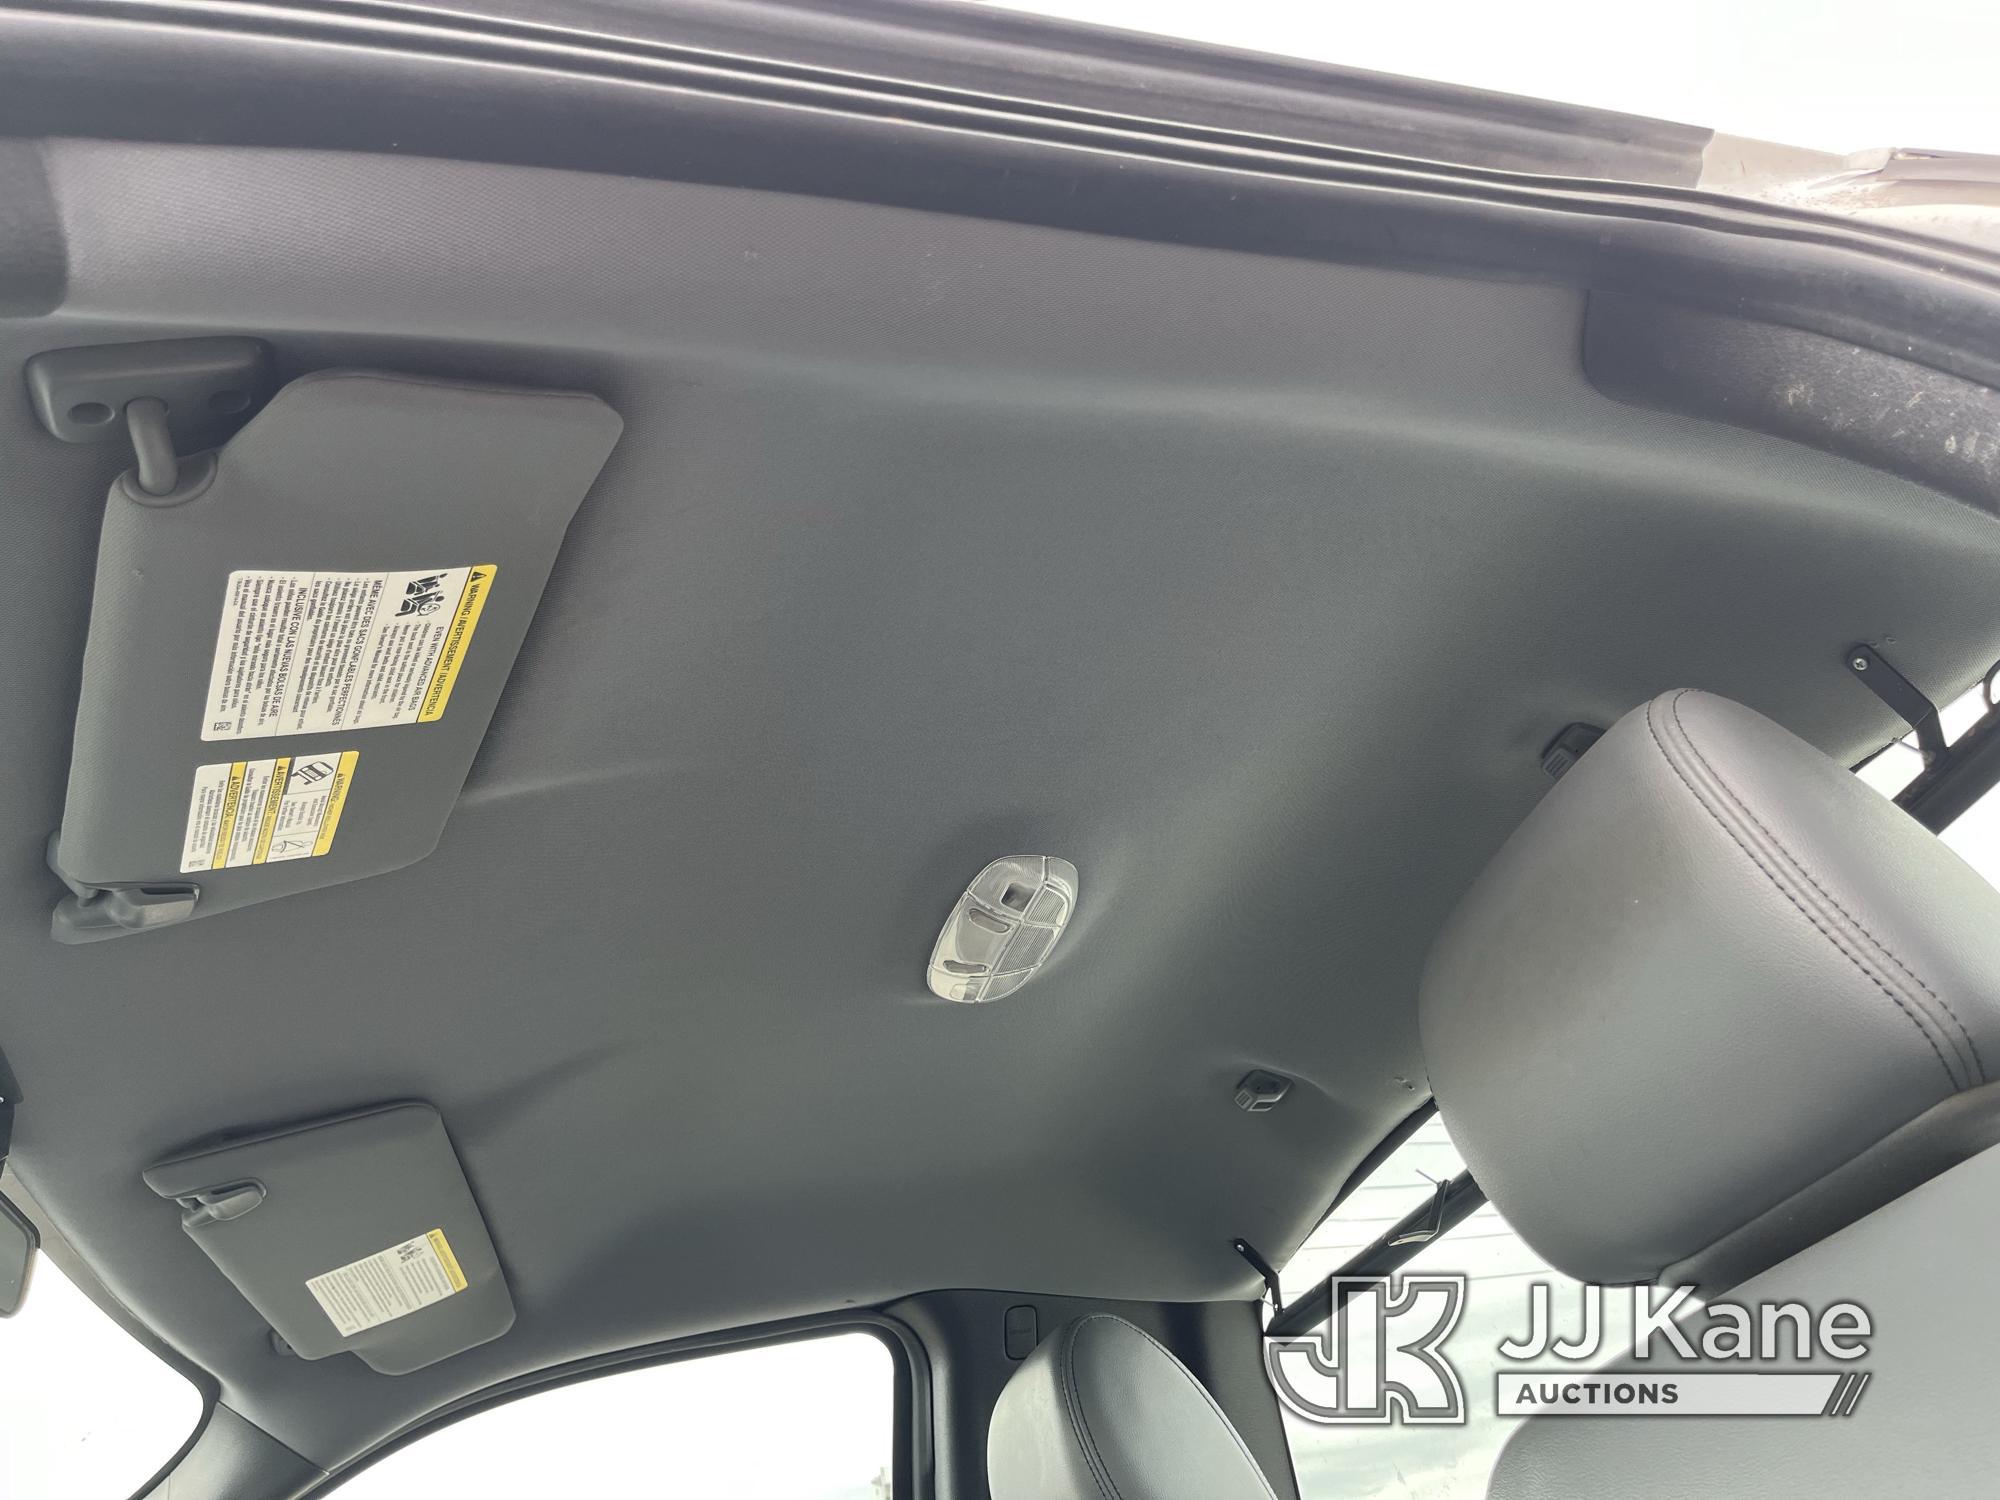 (Milan, TN) 2014 Ford F150 Pickup Truck, Service light on for low tire pressure Runs & Moves) (Munic